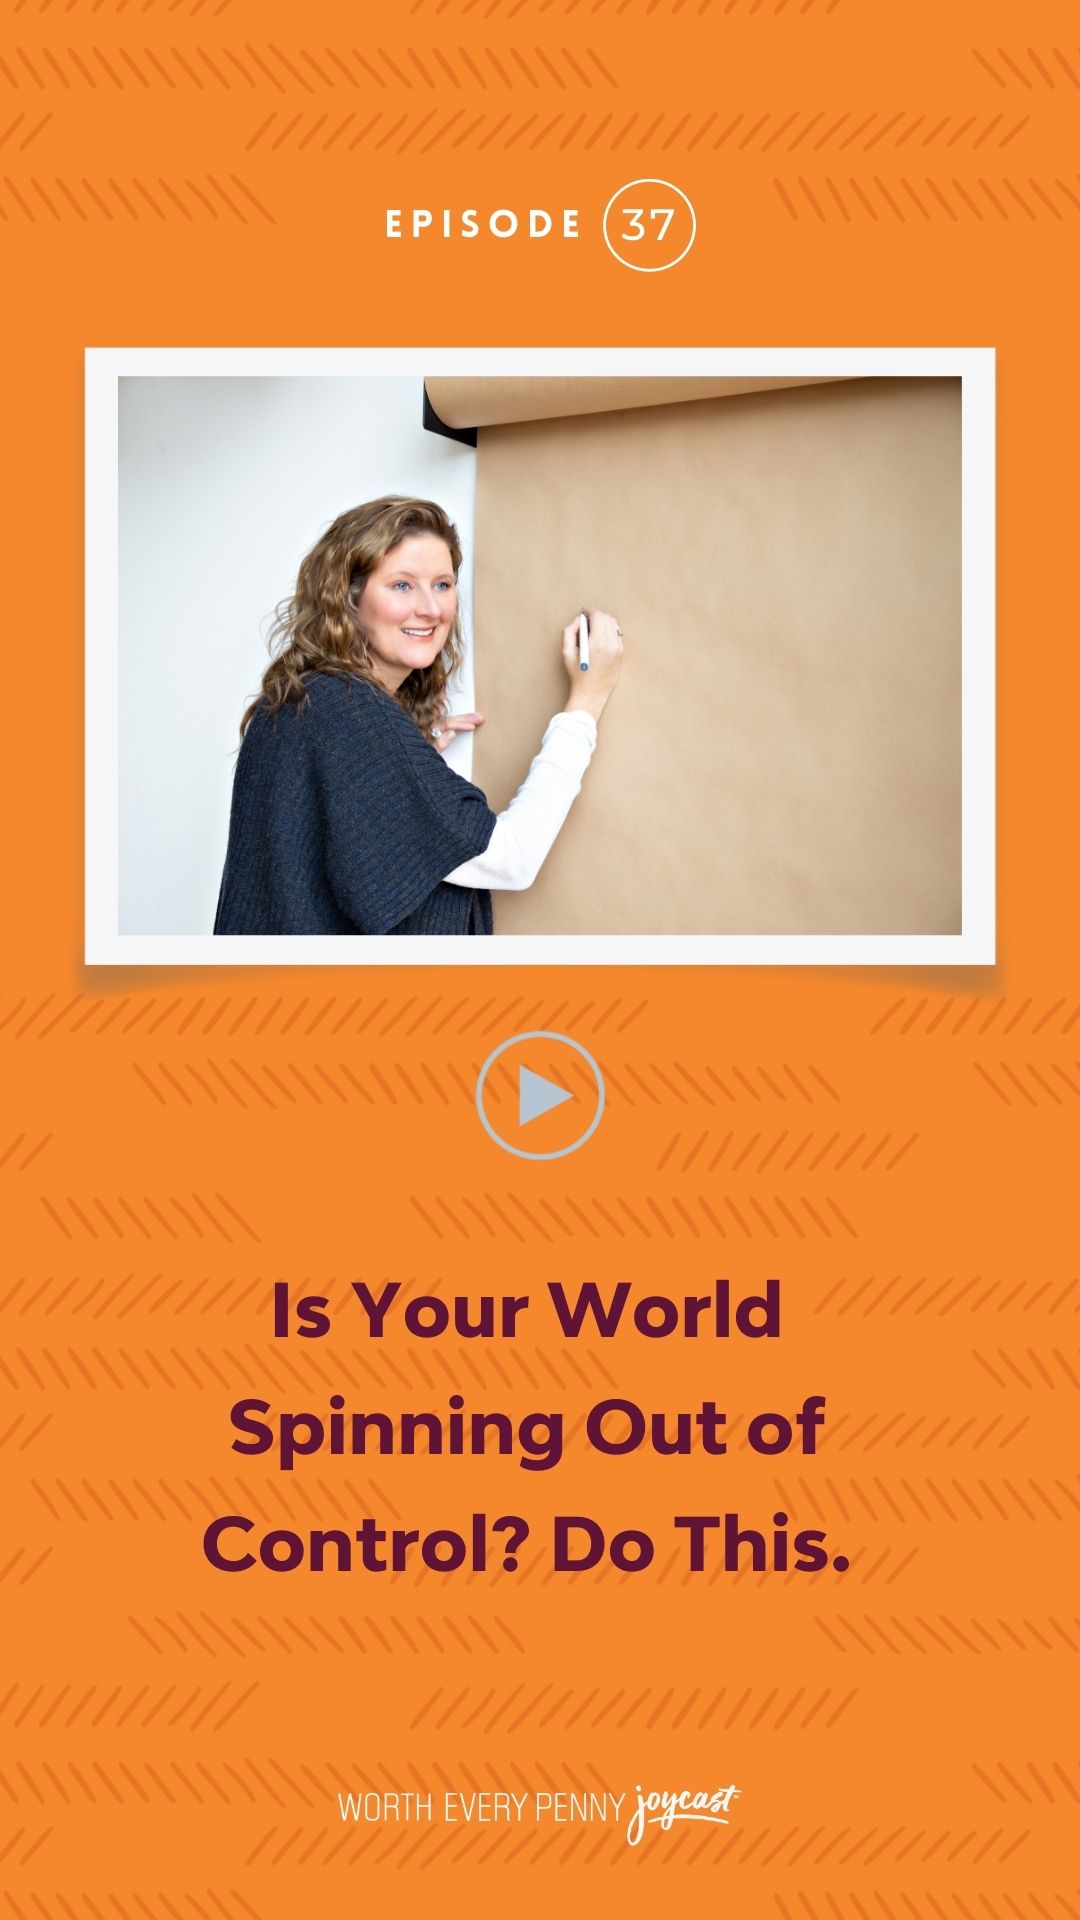 Episode 37: Is Your World Spinning Out of Control? Do This.